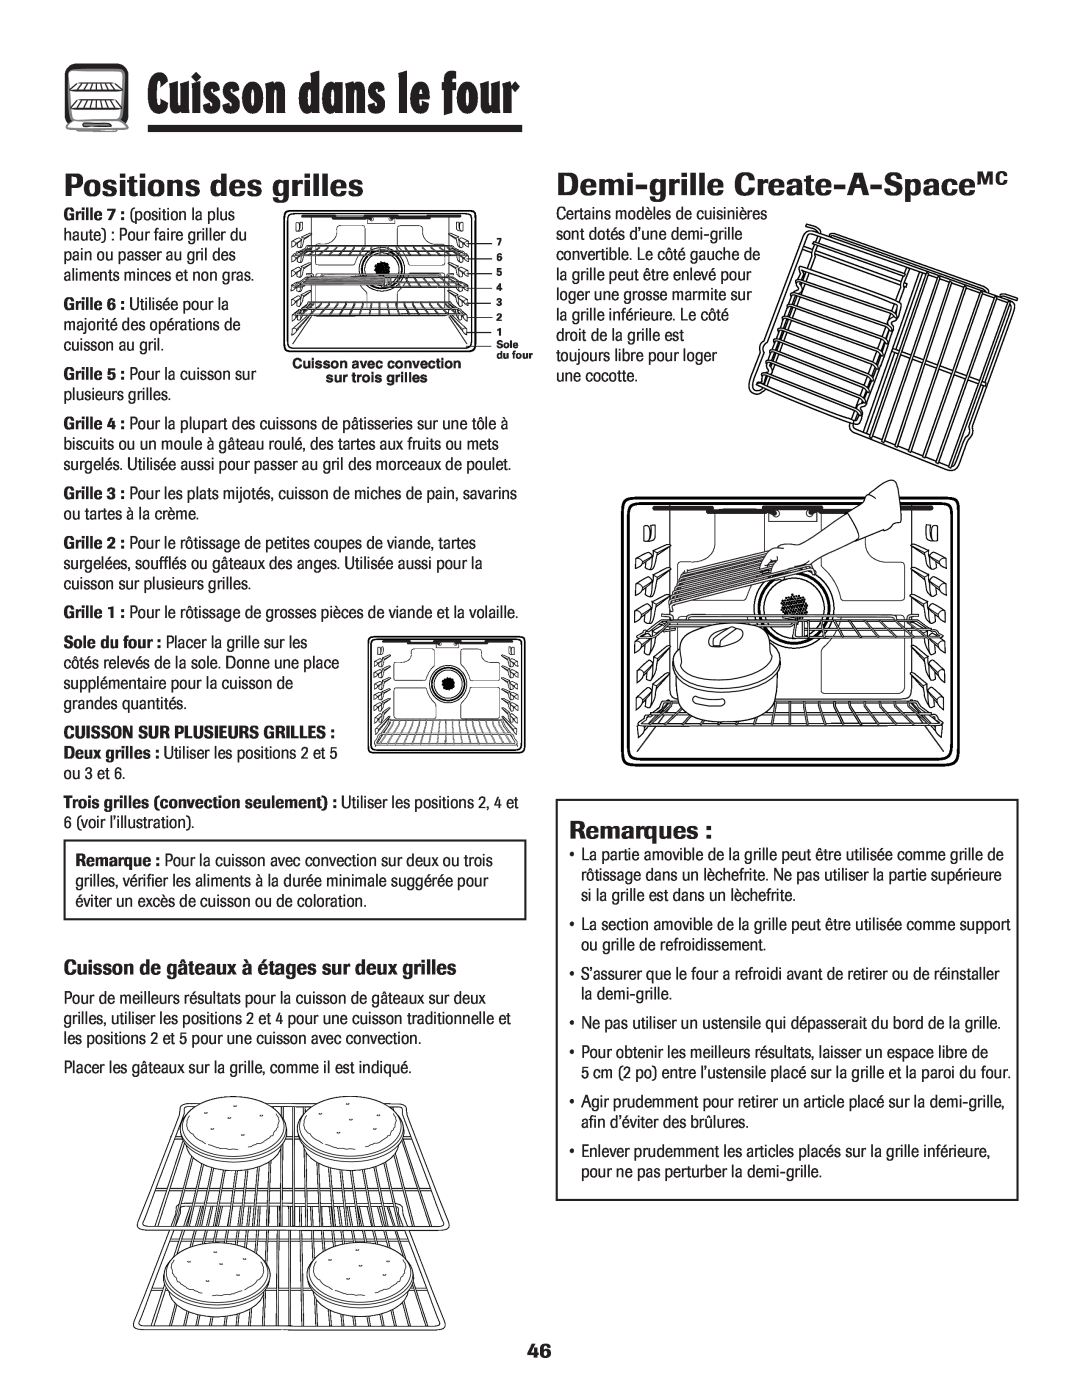 Maytag MER5875RAF manual Positions des grilles, Demi-grille Create-A-SpaceMC, Remarques, Cuisson dans le four 